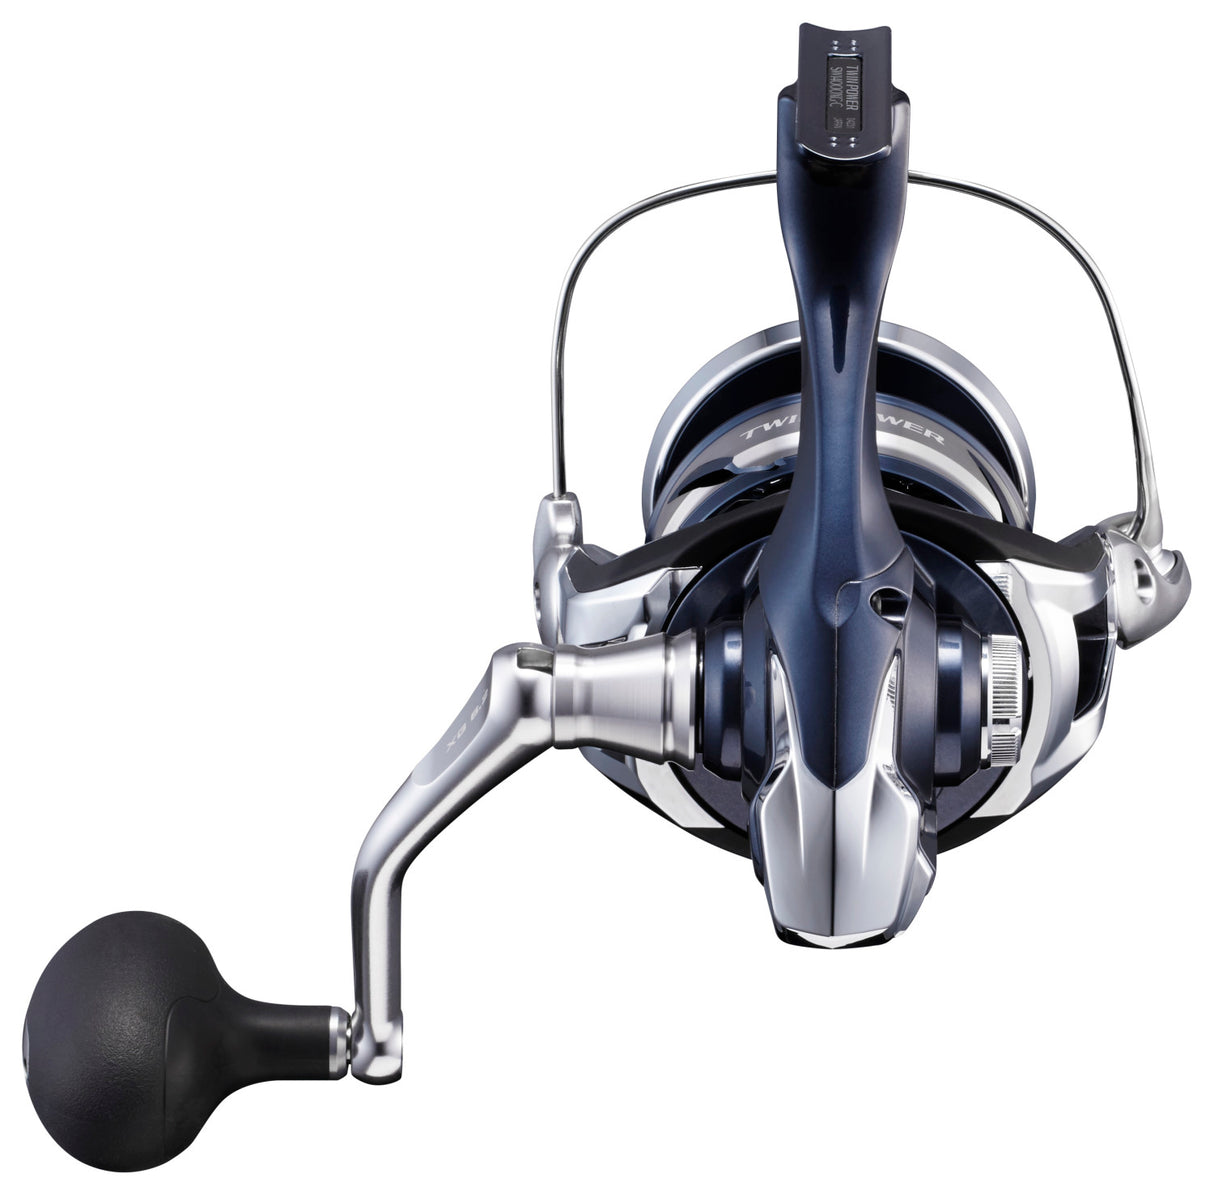 Shimano TwinPower SW Spinning Reel - TPSW10000PGC